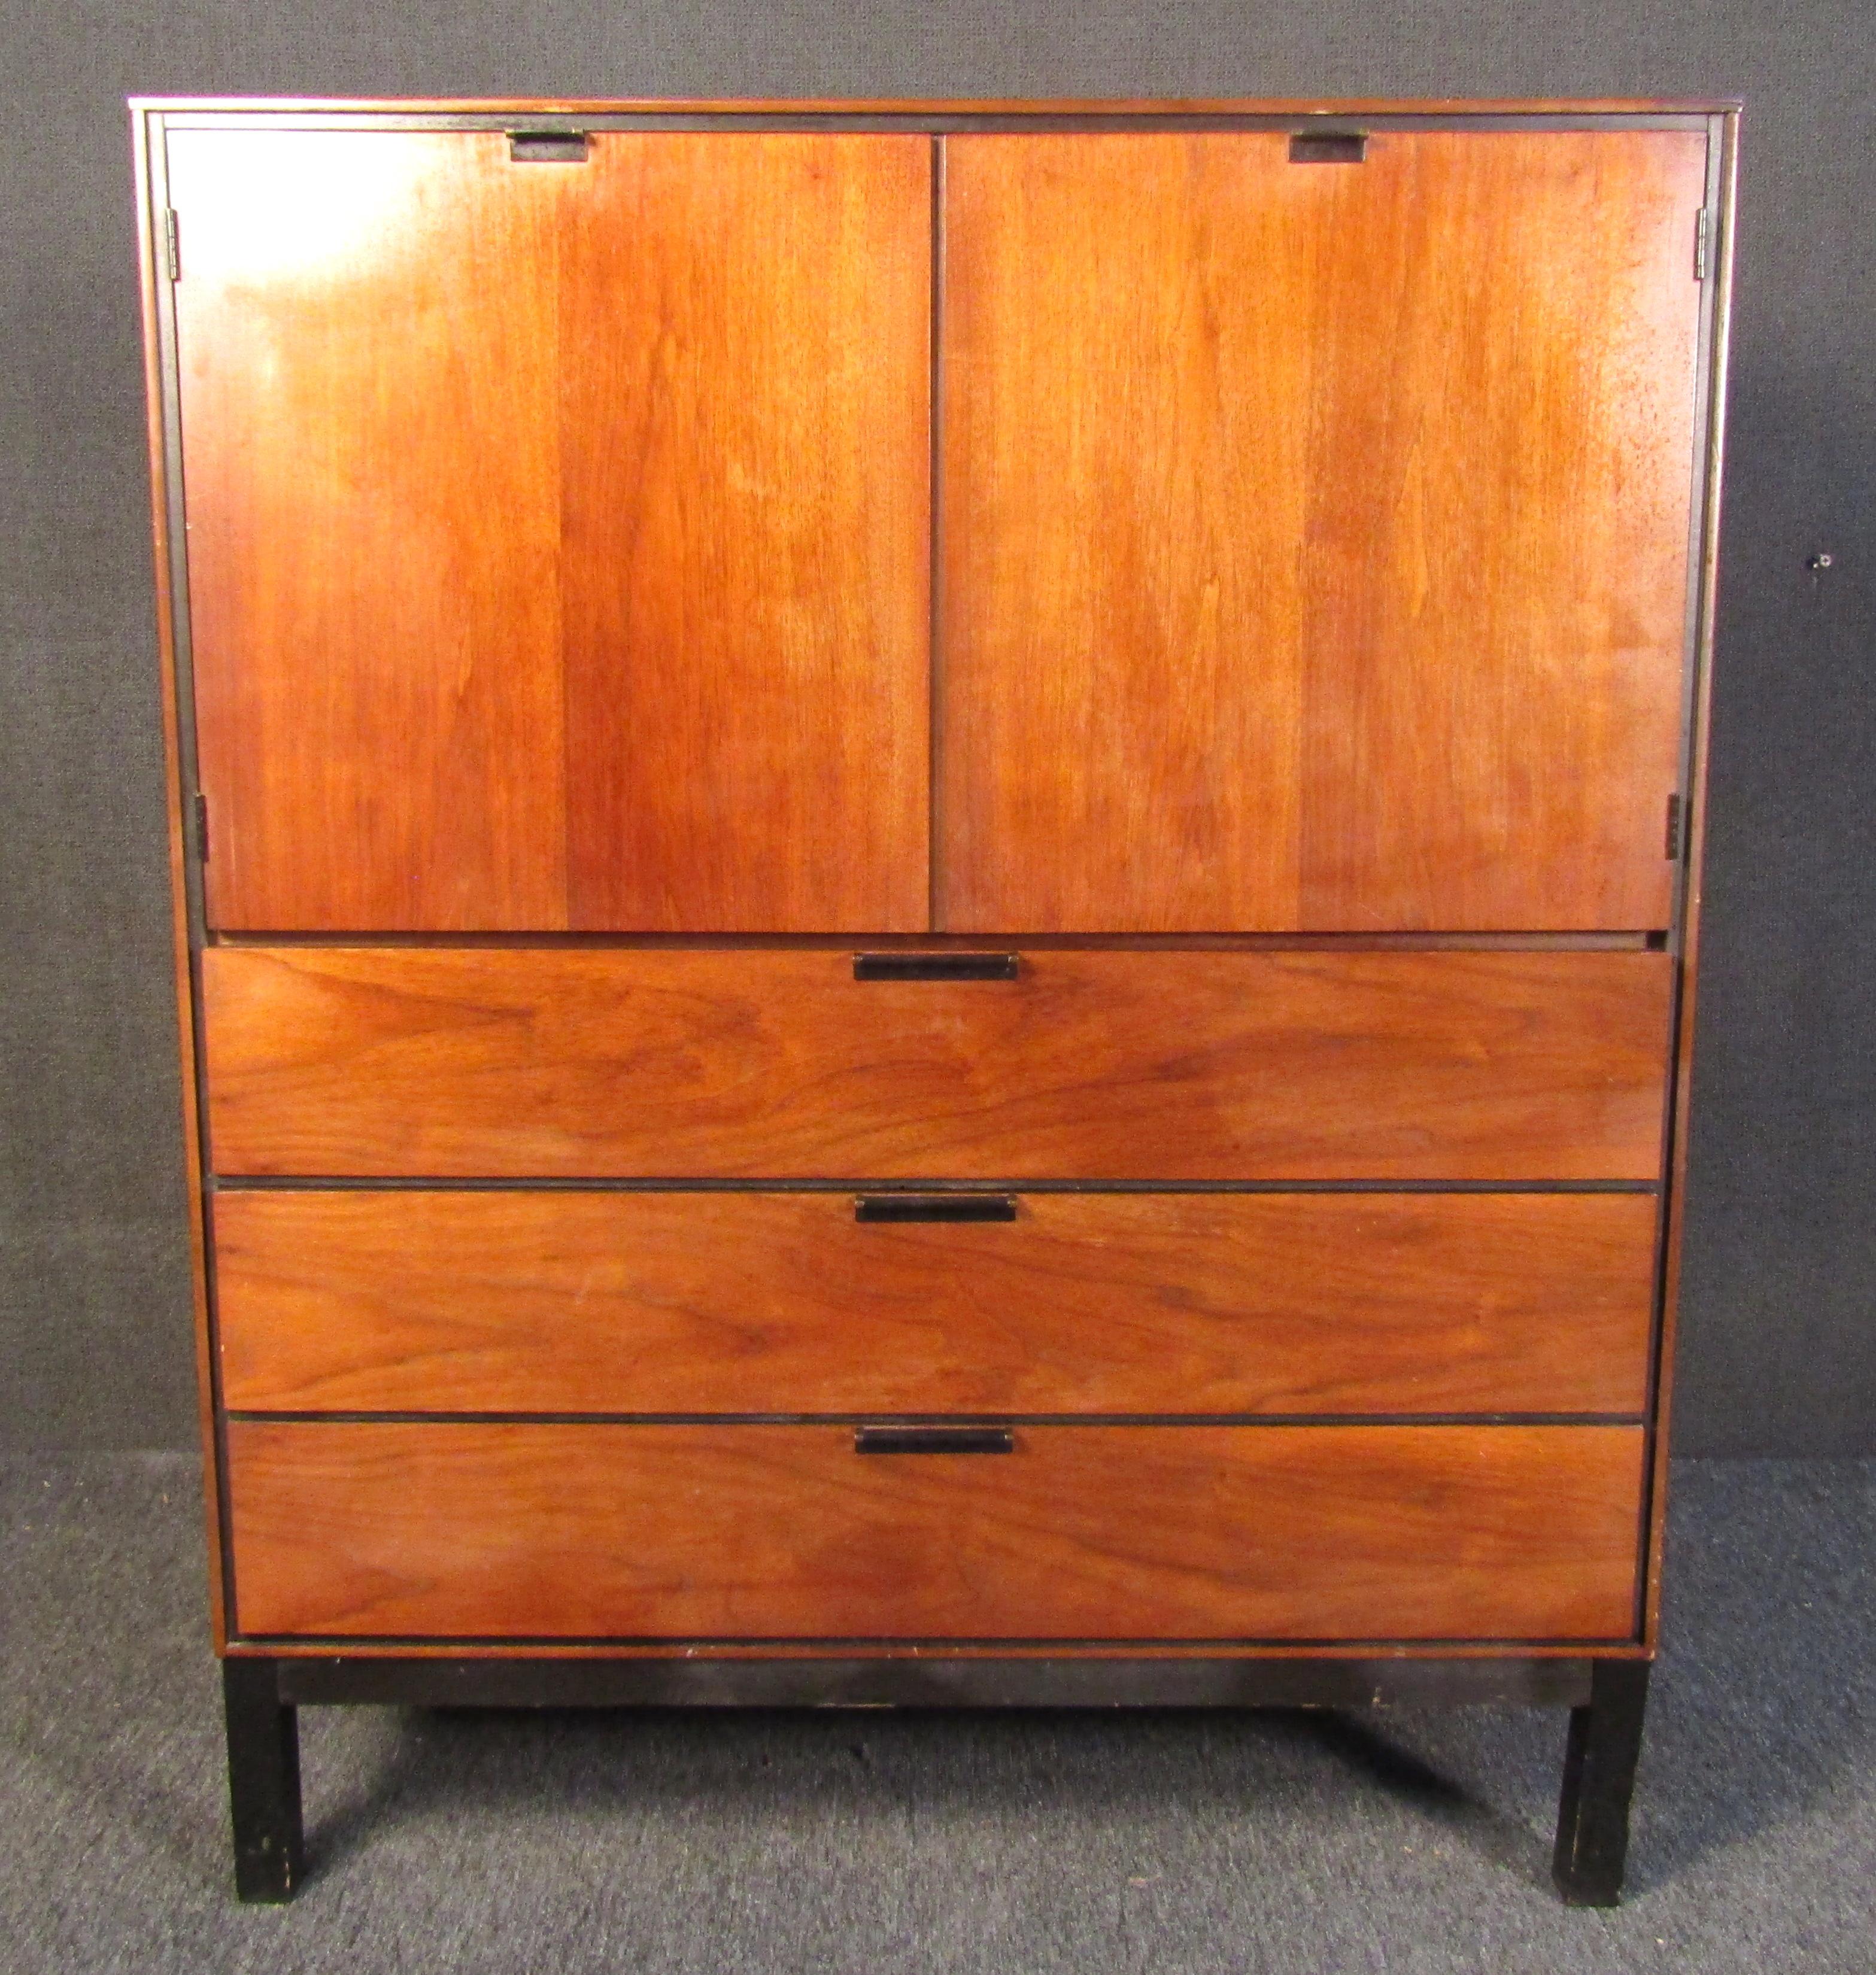 Beautiful vintage modern high boy dresser. Equipped with six spacious drawers, three on the bottom, and three hidden behind the two beautiful cabinet doors on top. The bottom drawer of the cabinet features dividers for easier organization. This